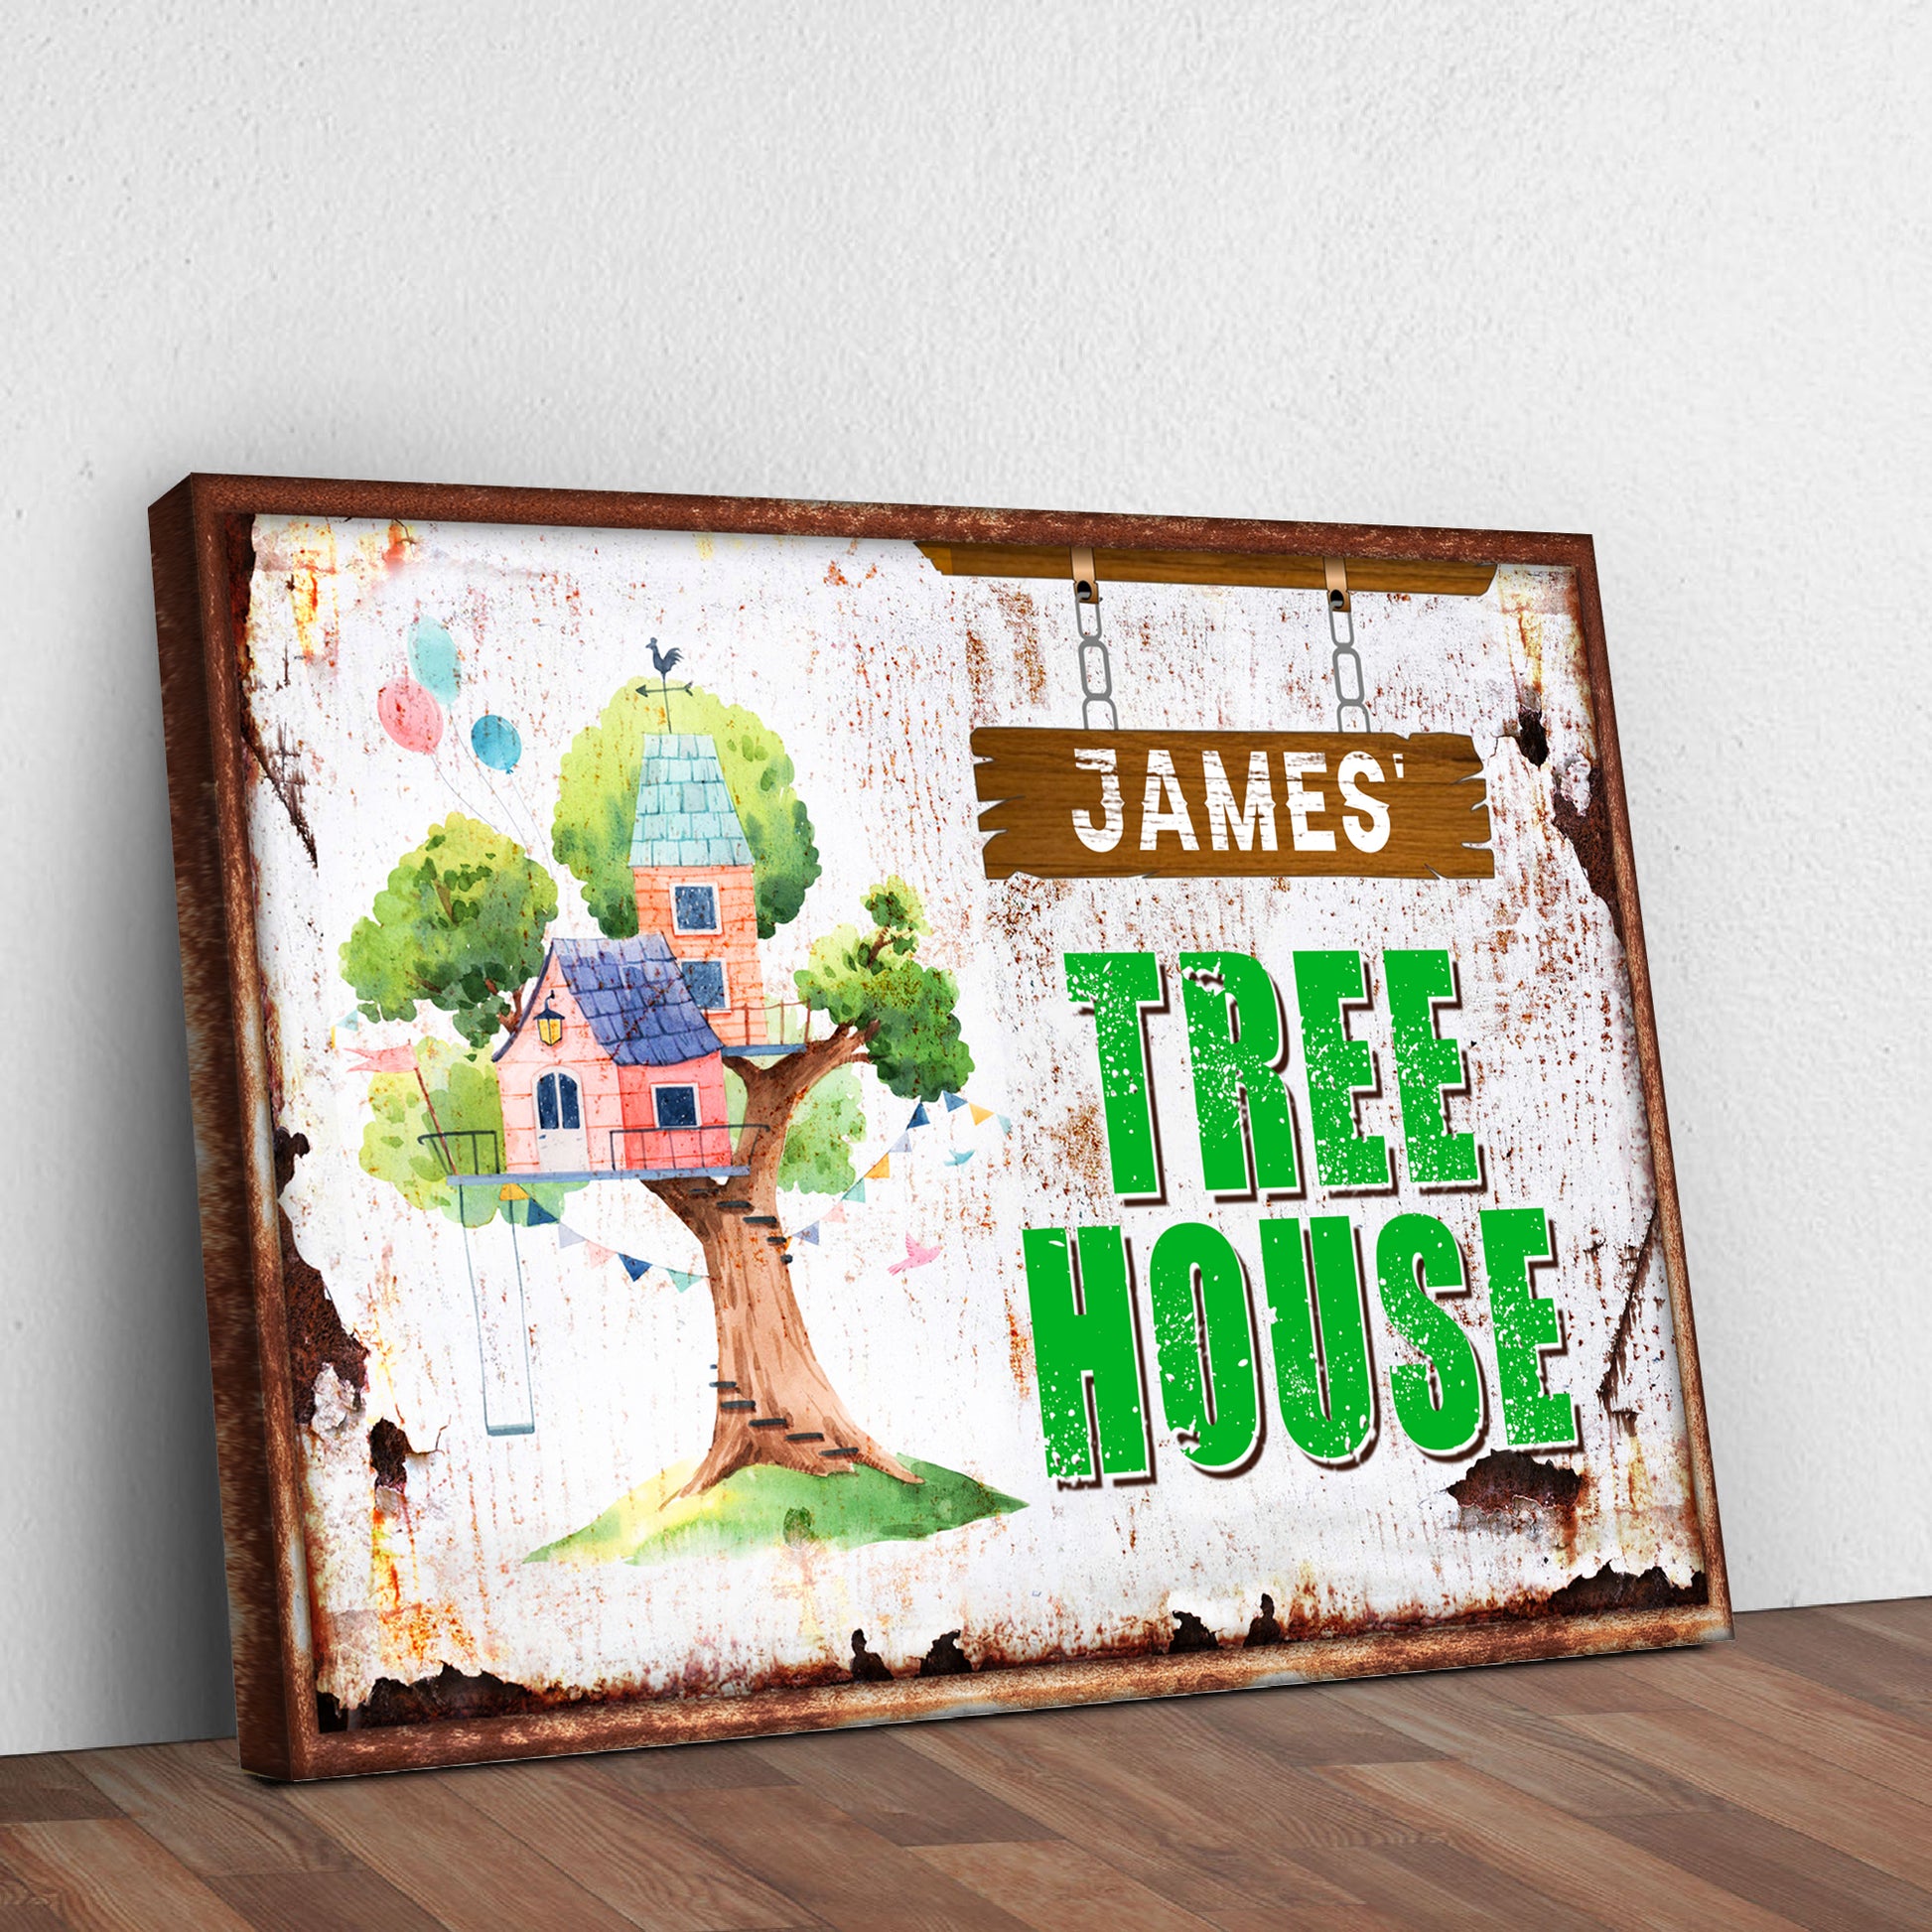 Kid Tree House (Ready to hang) - Wall Art Image by Tailored Canvases